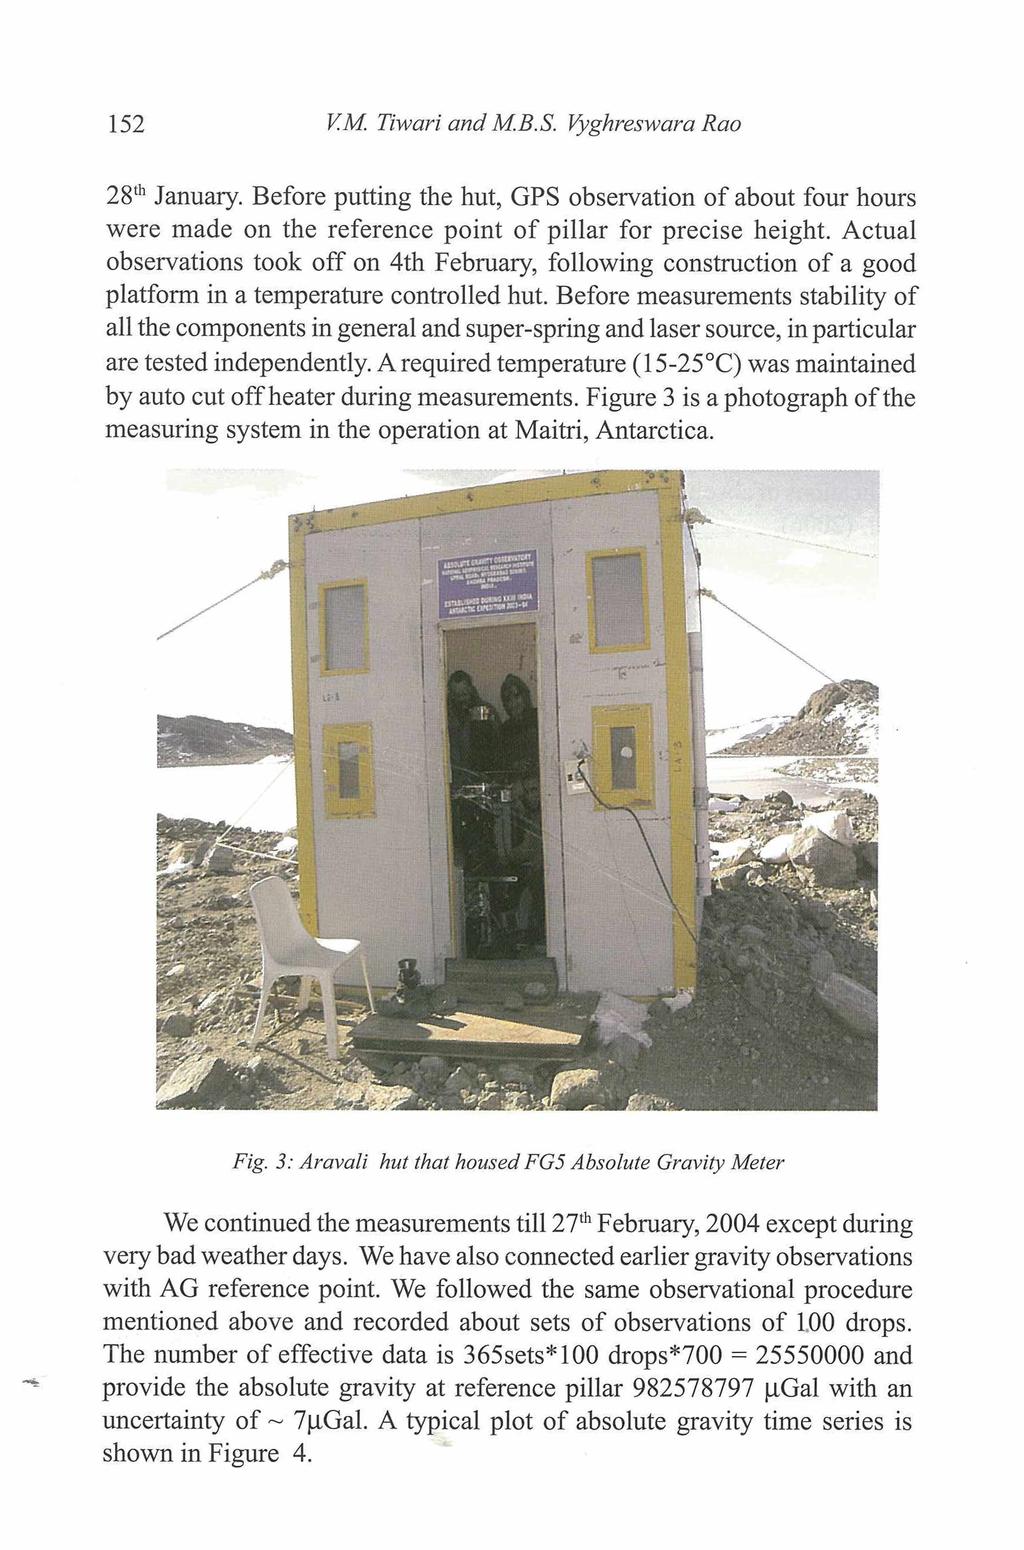 152 V.M. Tiwari and M.B.S. Vyghreswara Rao 28th January. Before putting the hut, GPS observation of about four hours were made on the reference point of pillar for precise height.